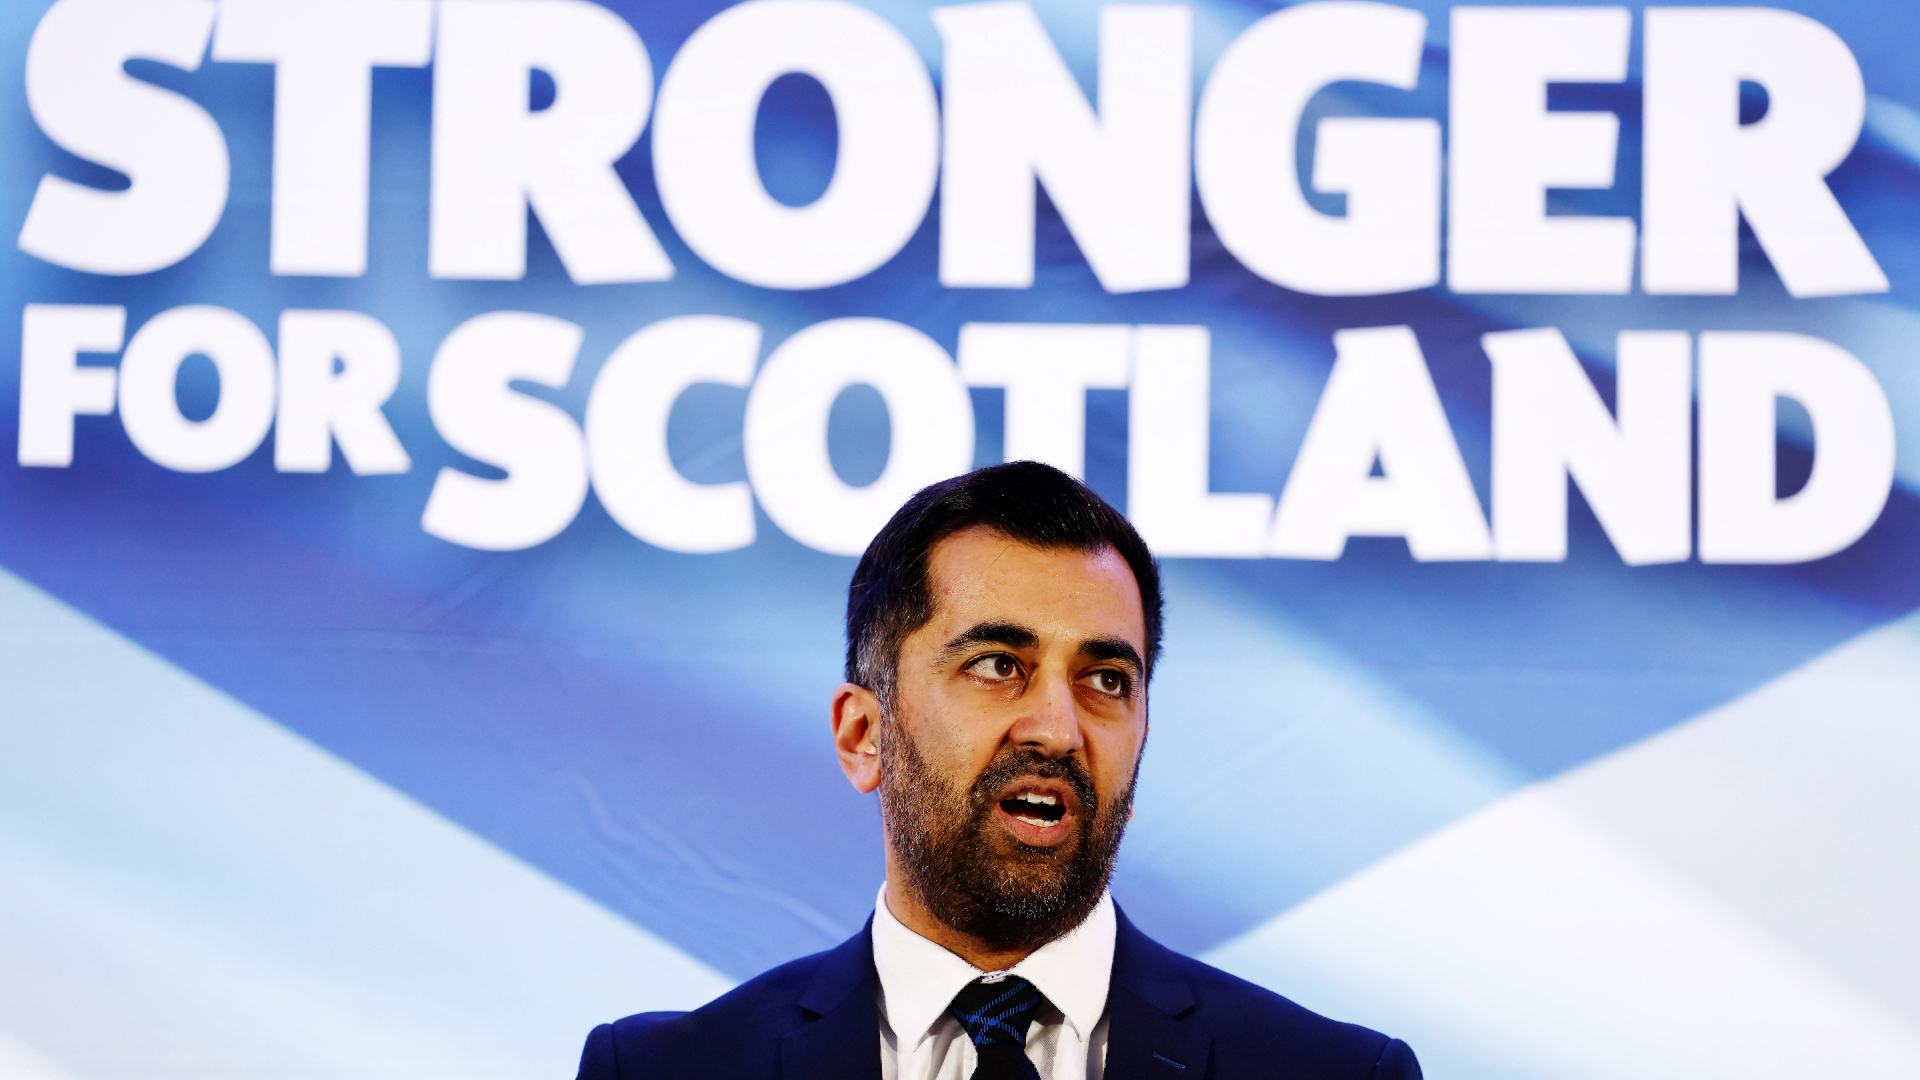 At 37 years old, Humza Yousaf is the youngest First Minister in Scottish history.